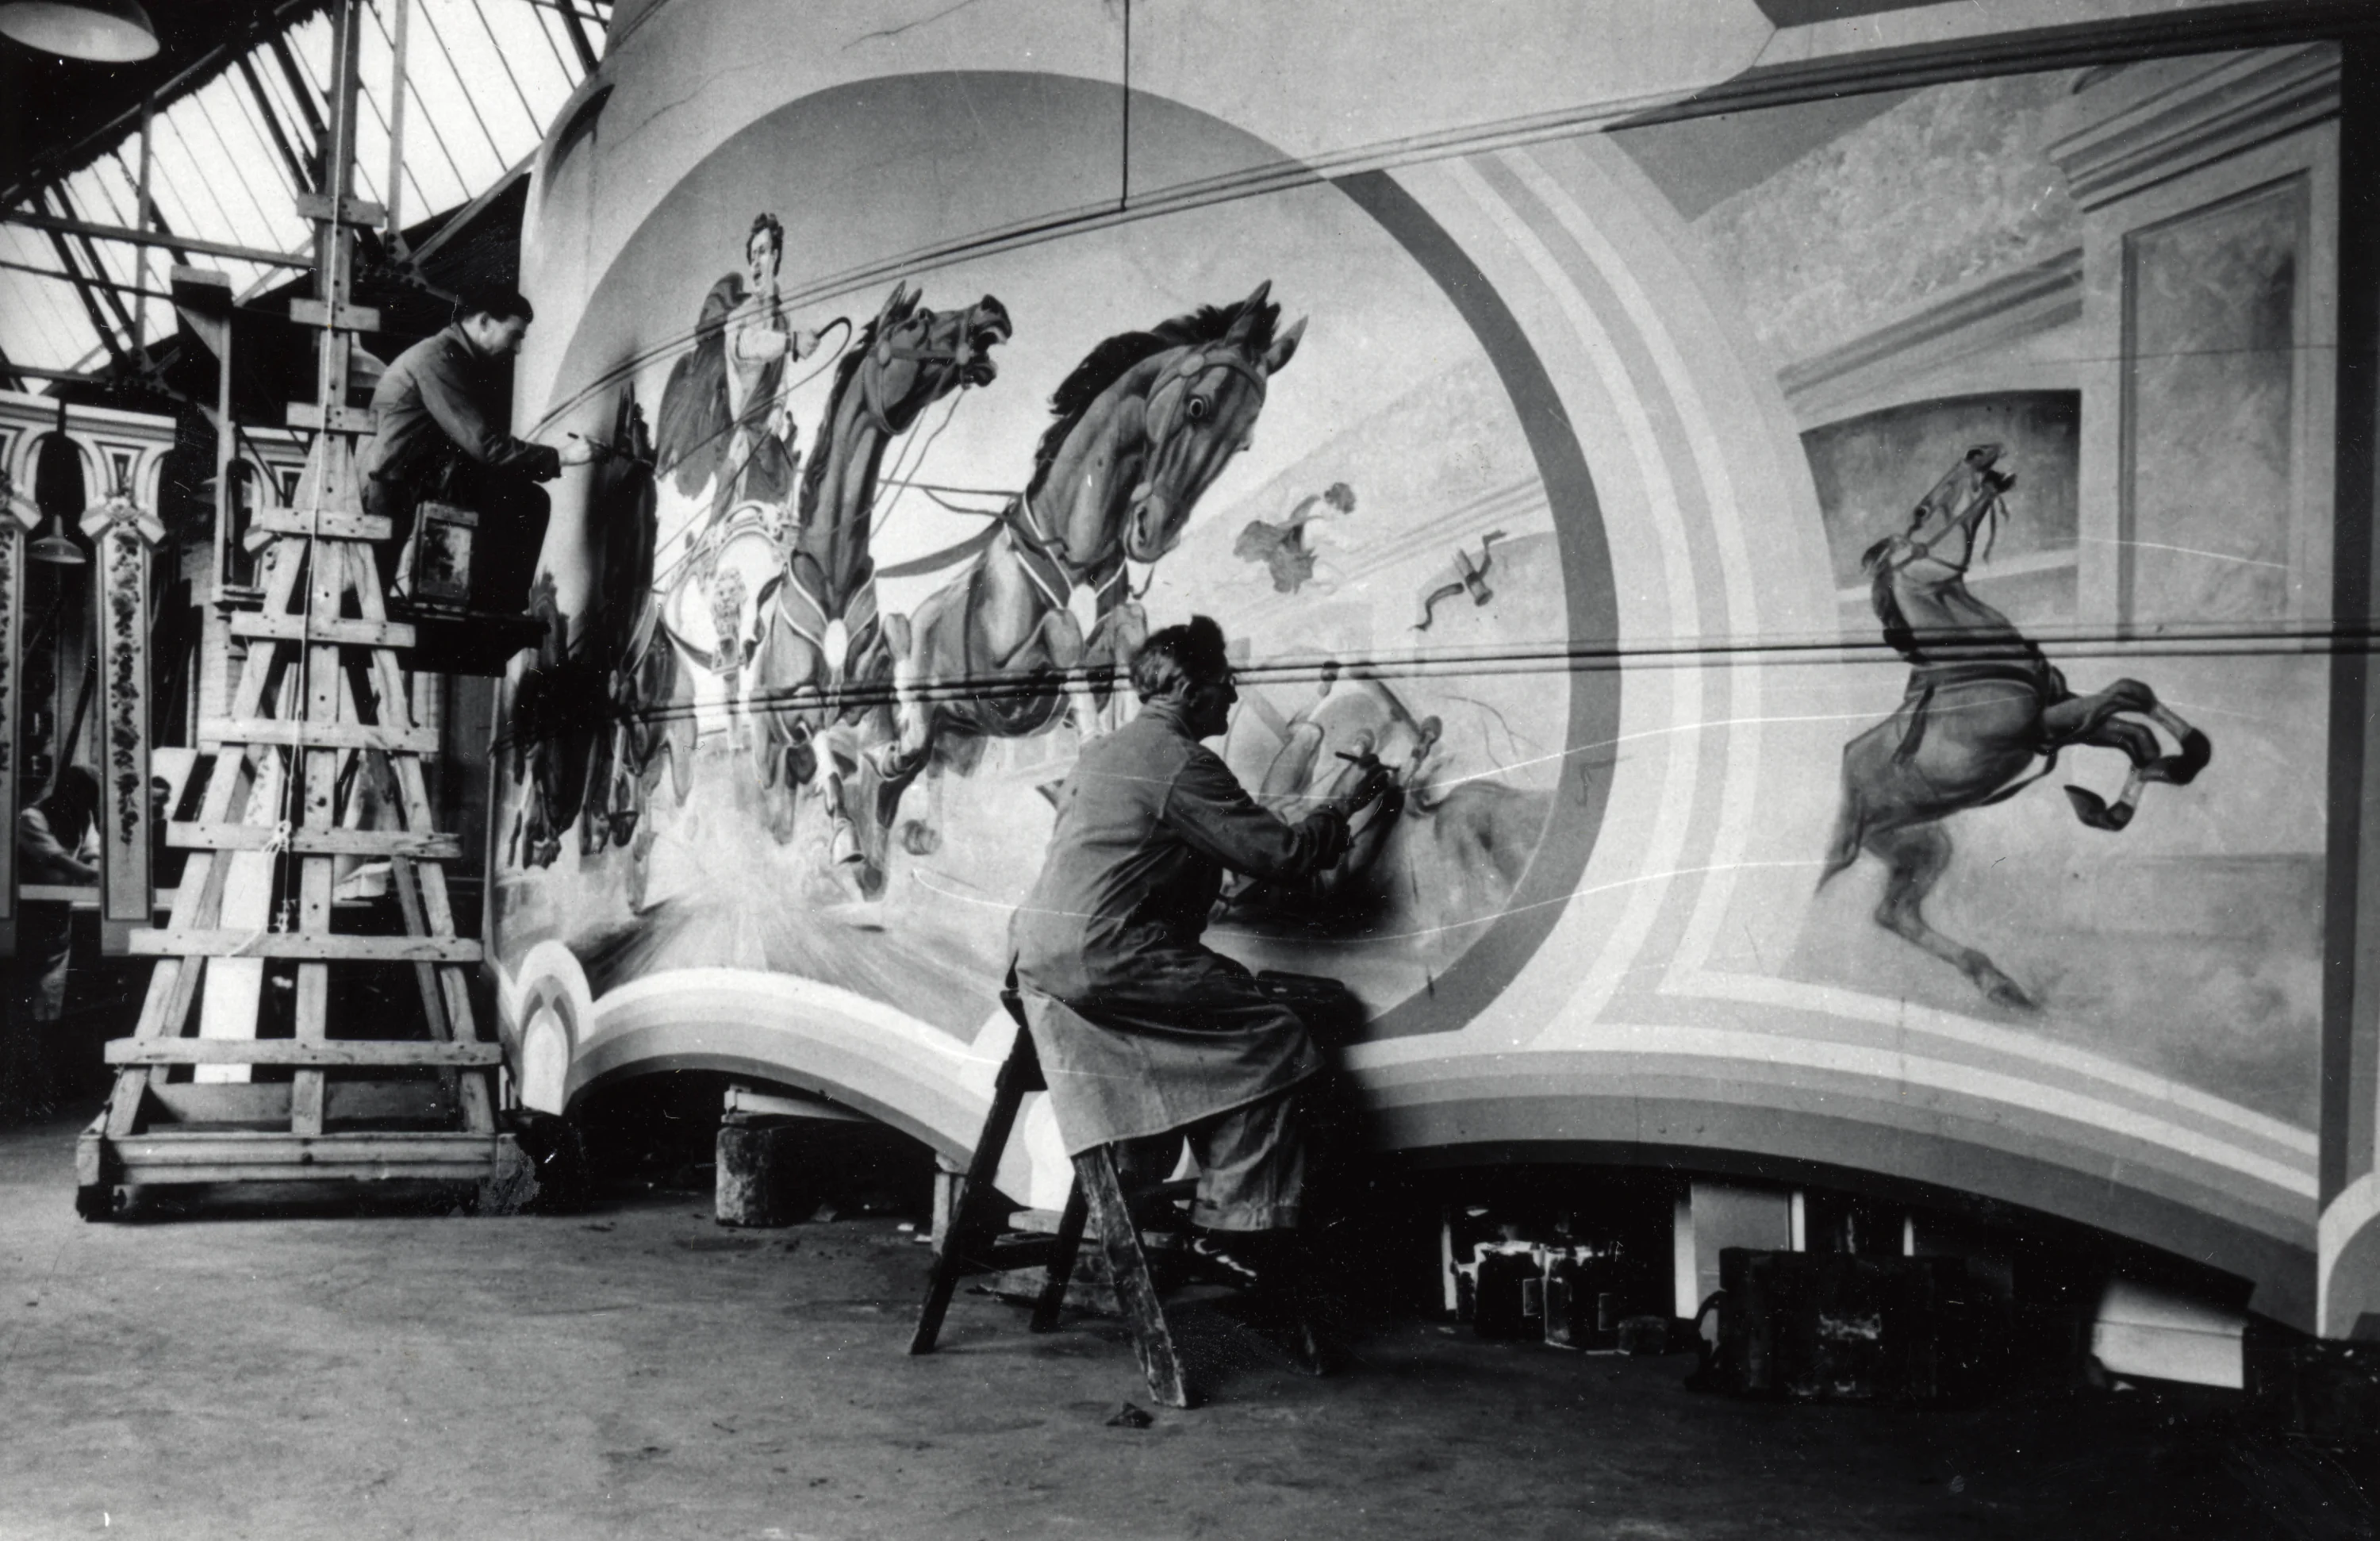 George Orton, Sons and Spooner Limited works photograph showing fairground artists Sid and Albert Howell painting Ark ride A100 1946.¹